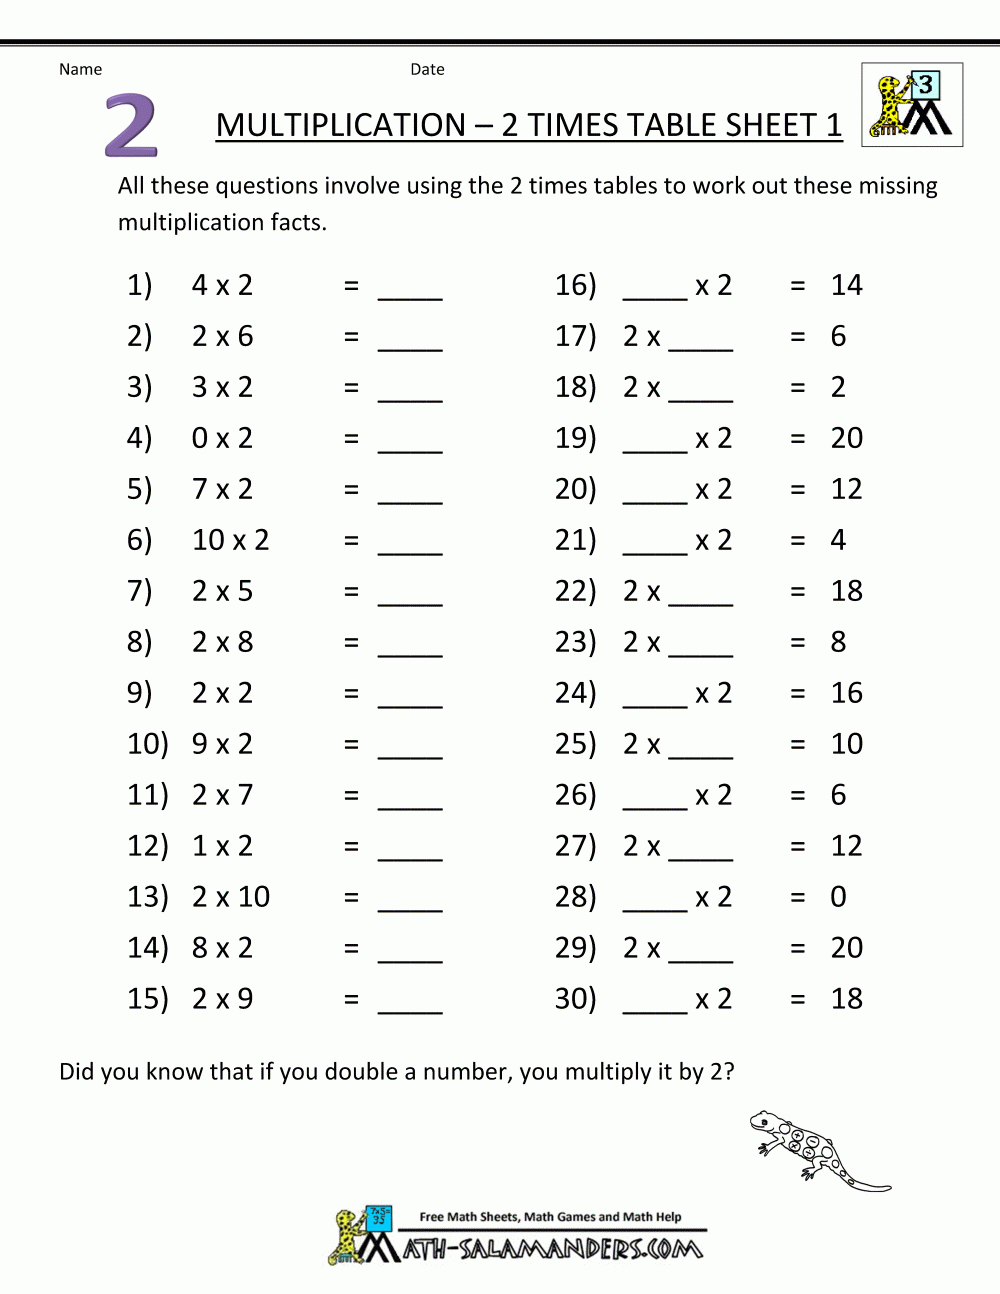 Multiplication Drill Sheets 2 Times Table 1 intended for Printable Multiplication 2X2